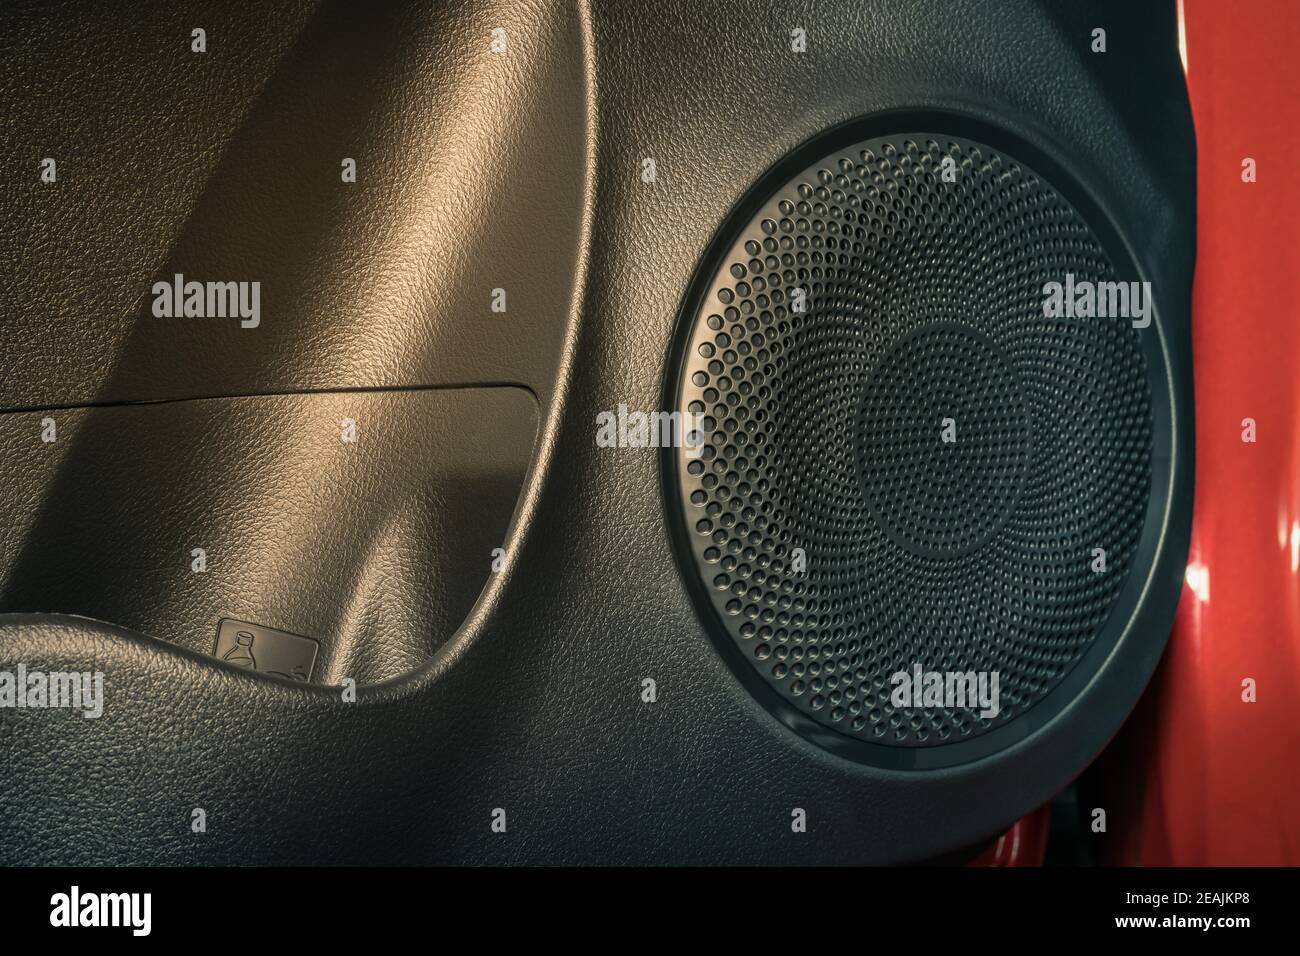 Car Speaker and Cup Holder in Zoom View in Vintage Tone Stock Photo